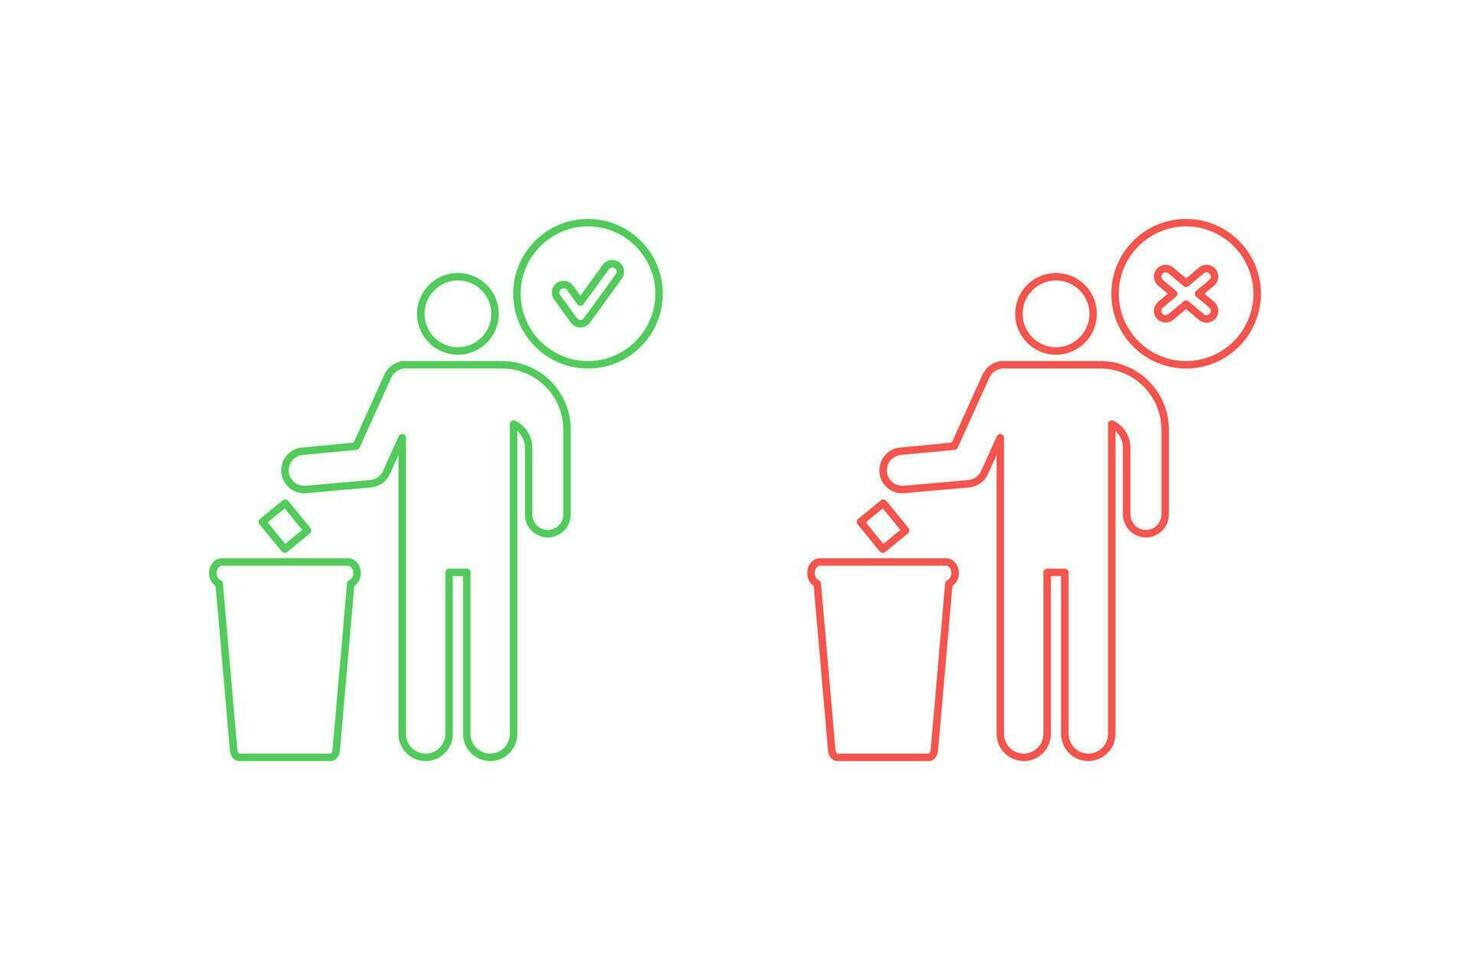 Trash can icon vector design, throw trash in its place and do not litter